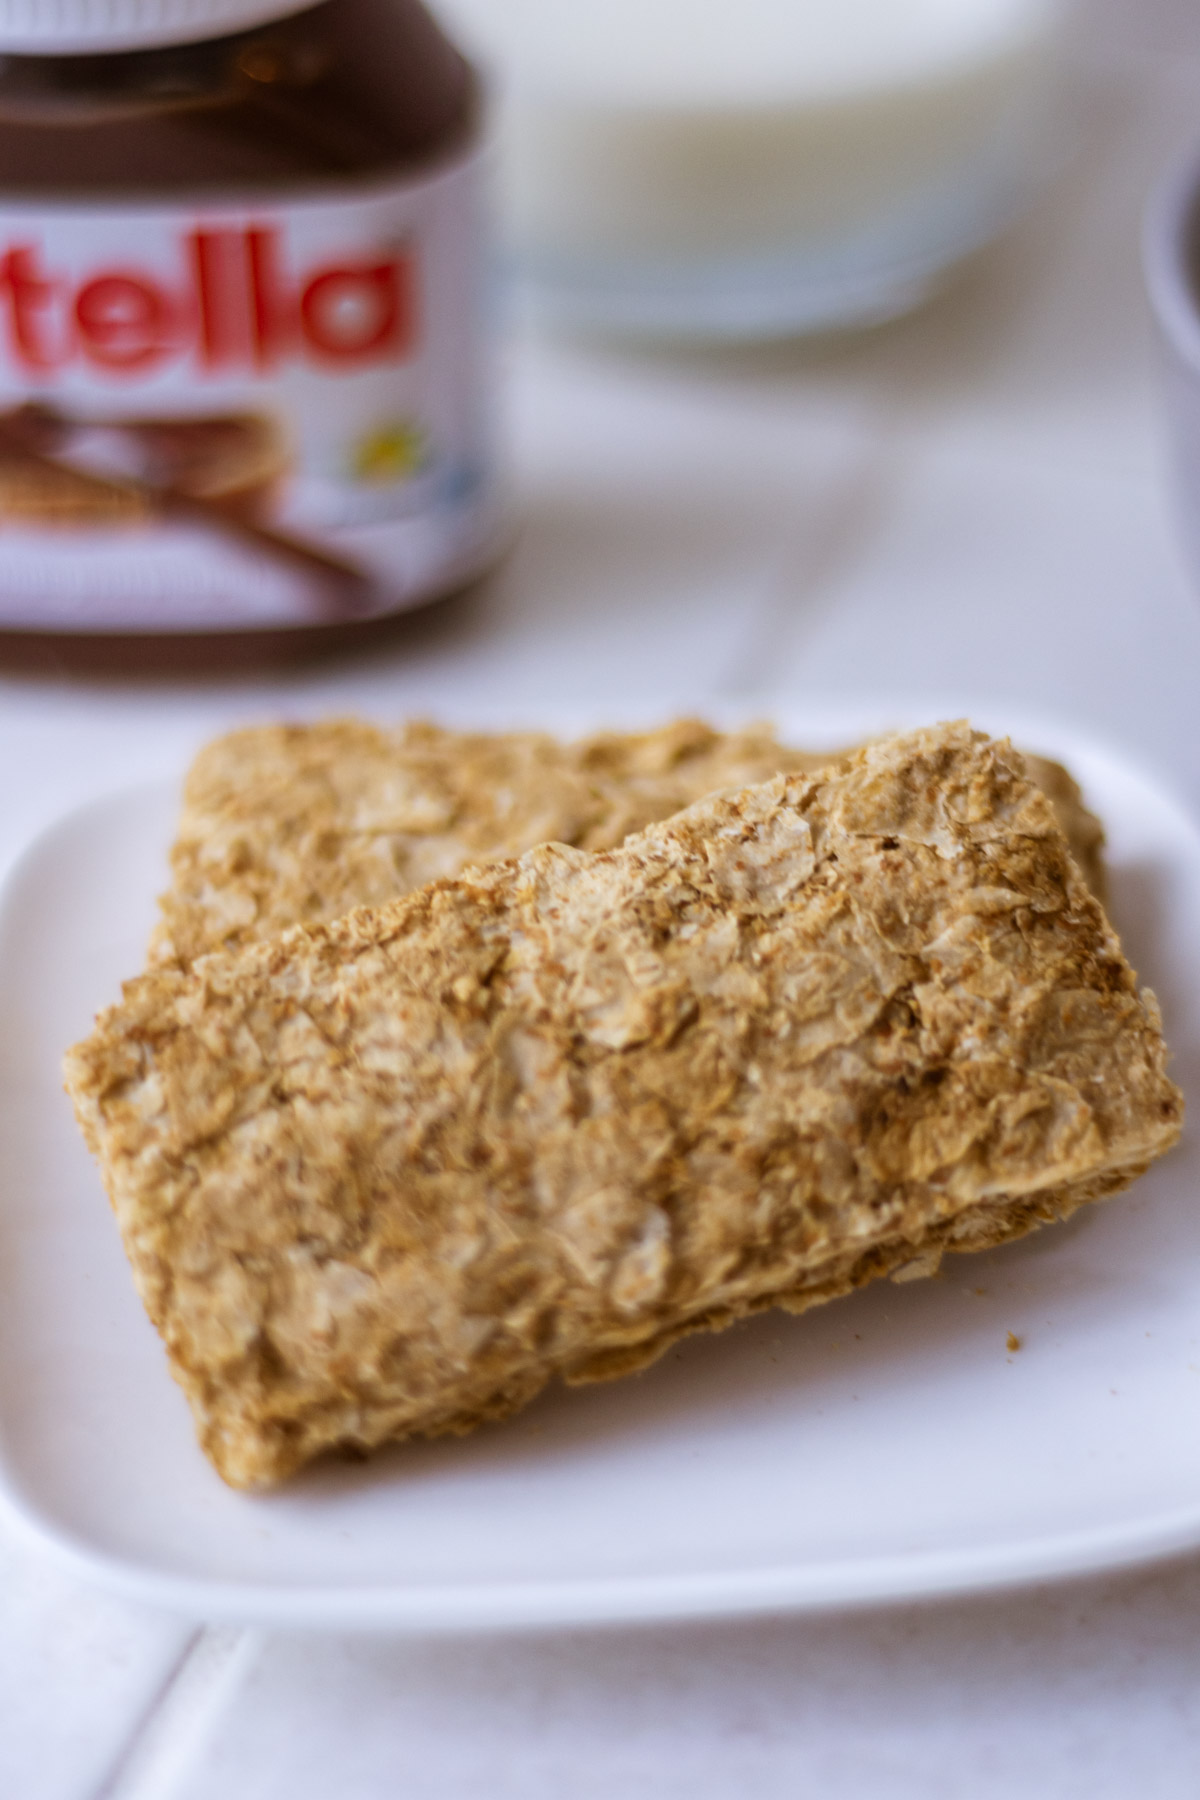 Close up shot of Weetbix/Weetabix with a blurred image of a Nutella jar in the background.